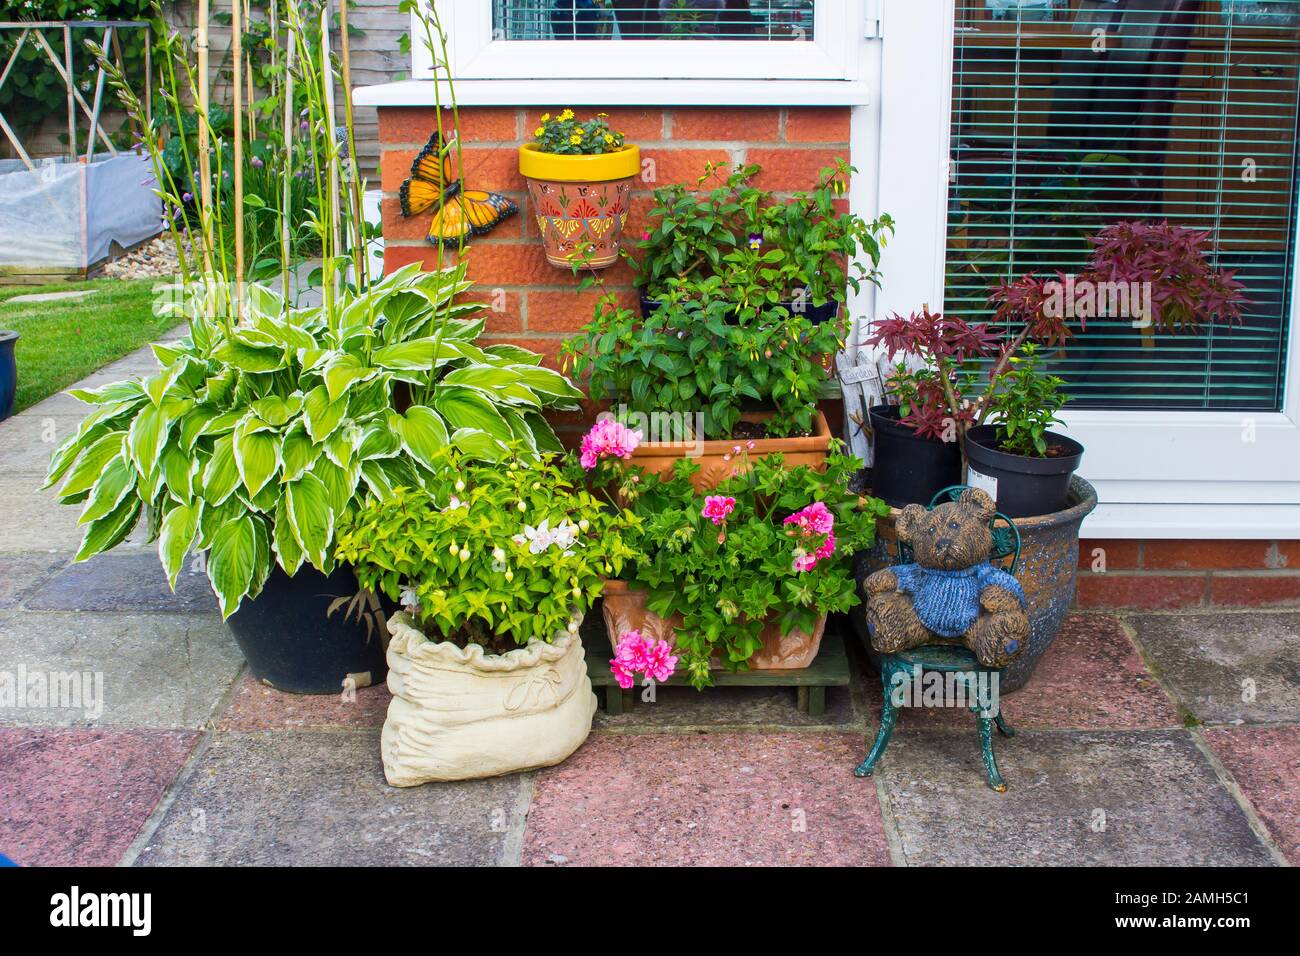 A typical container garden display of herbaceous plants  in a typical English garden in mid June. , Stock Photo